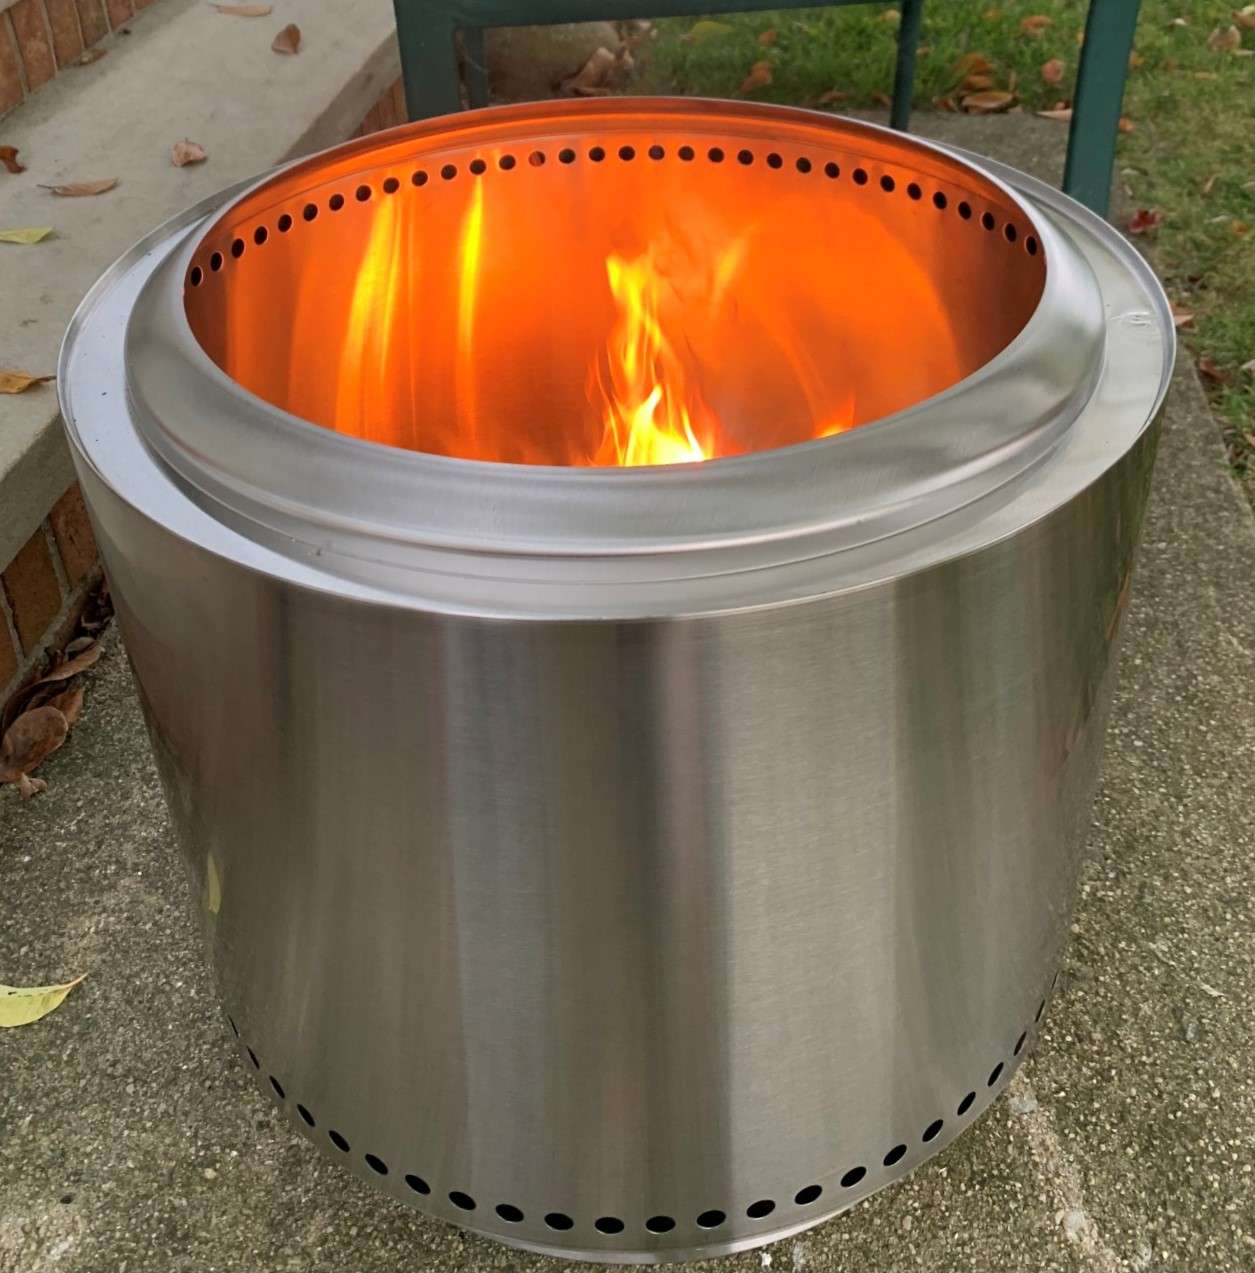 Solo Stove with campfire in it.